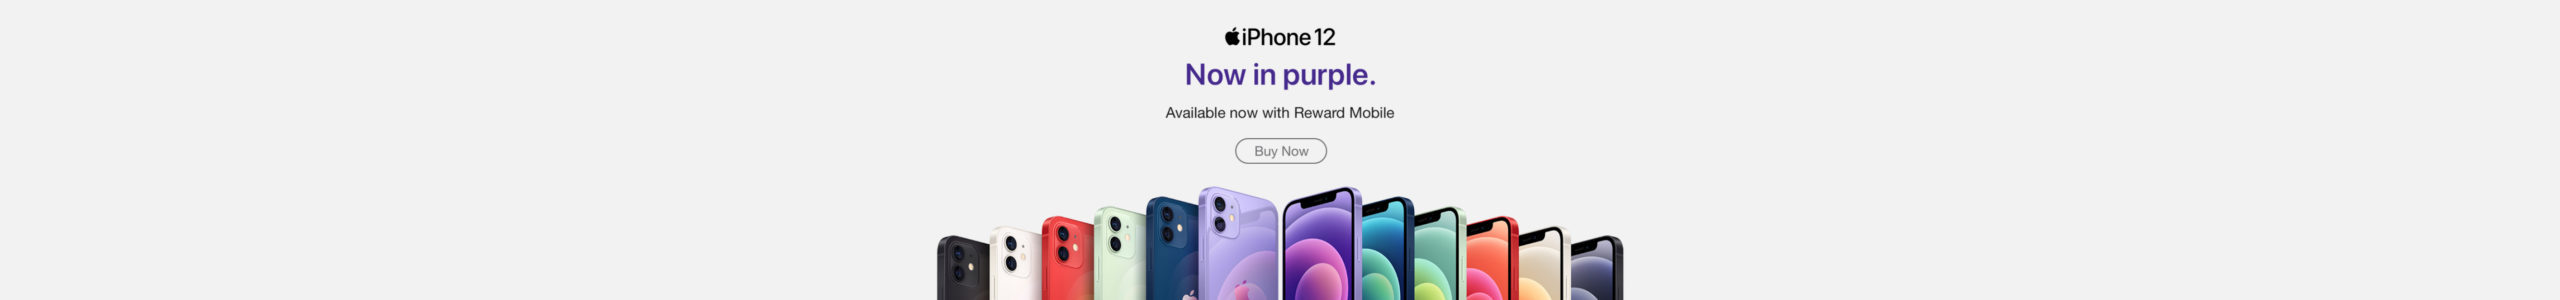 iPhone 12 now in purple